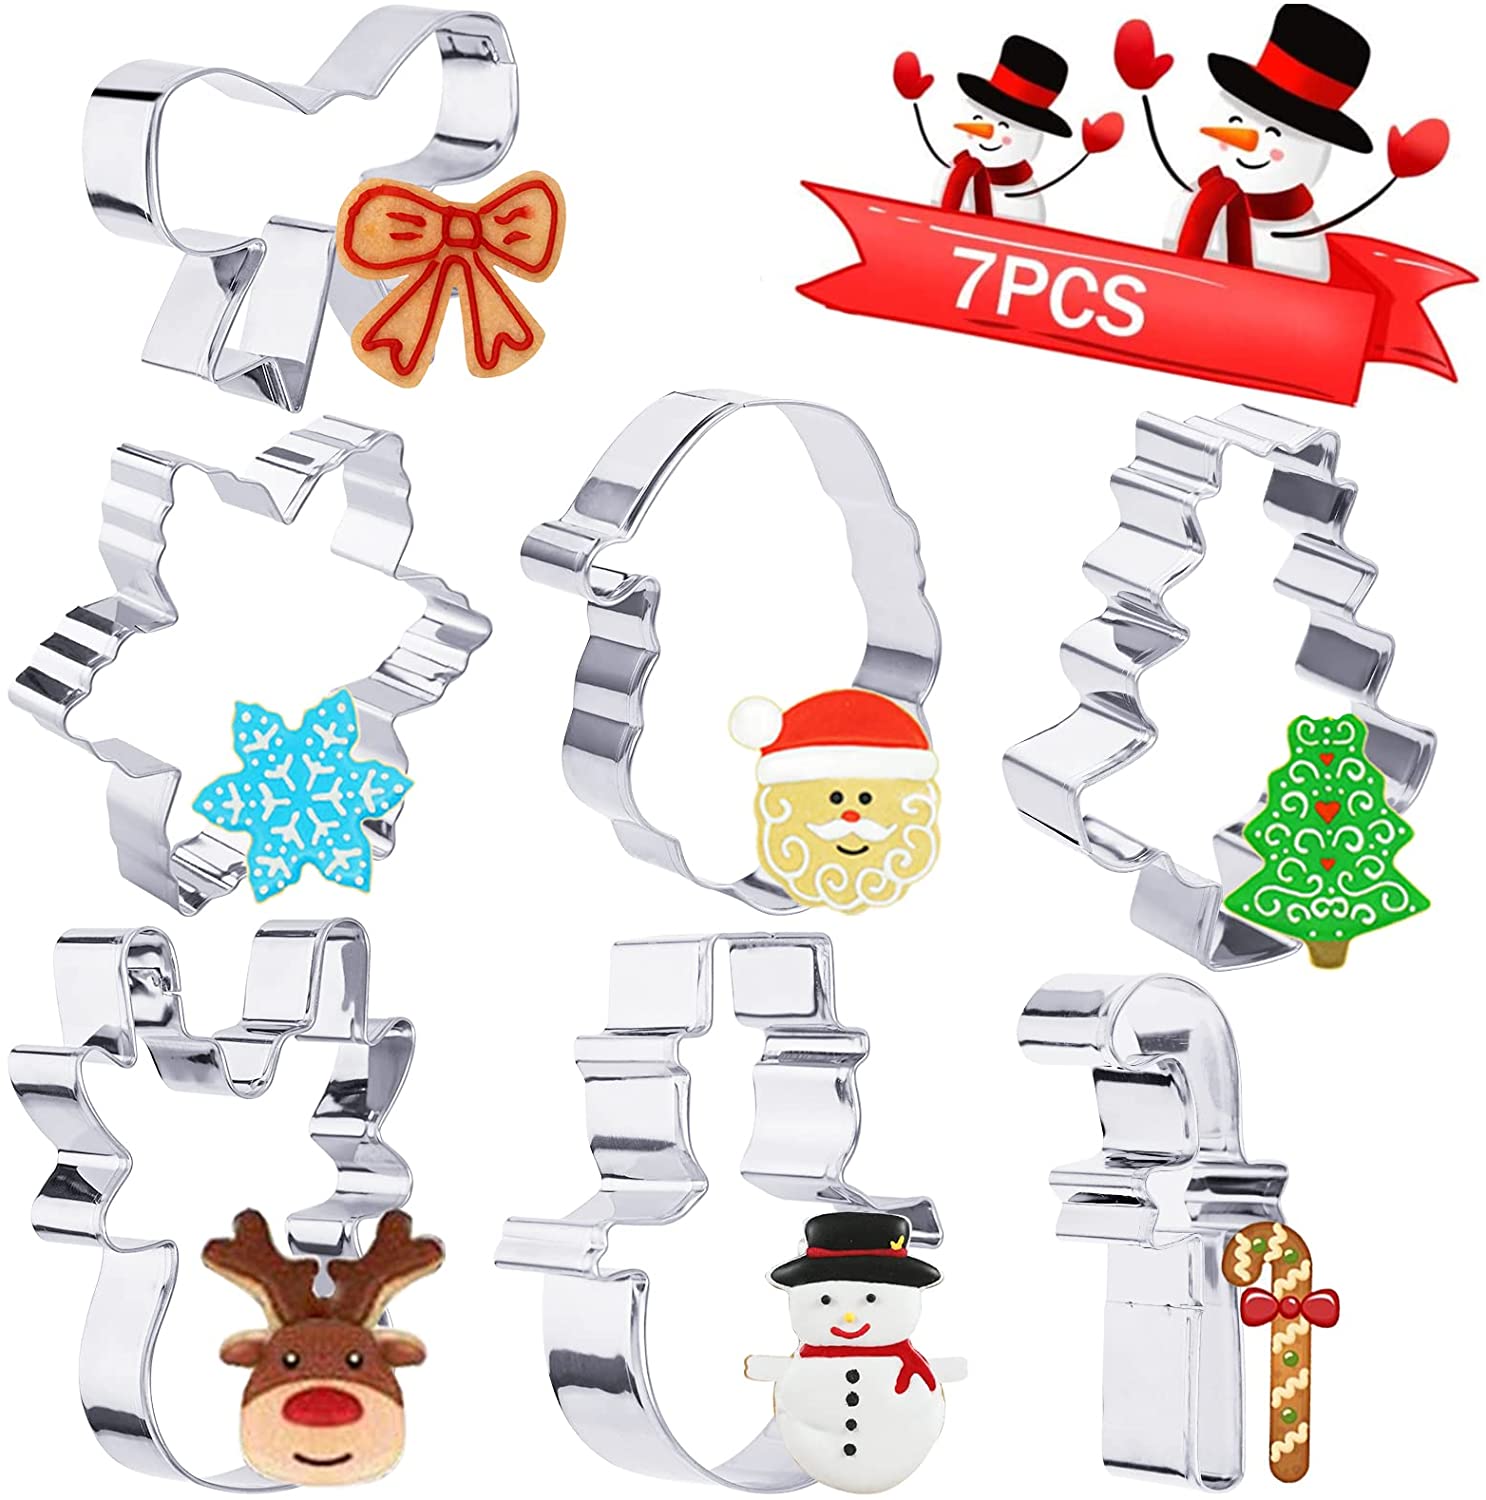 Faburo 7 stainless steel Christmas cookie cutters